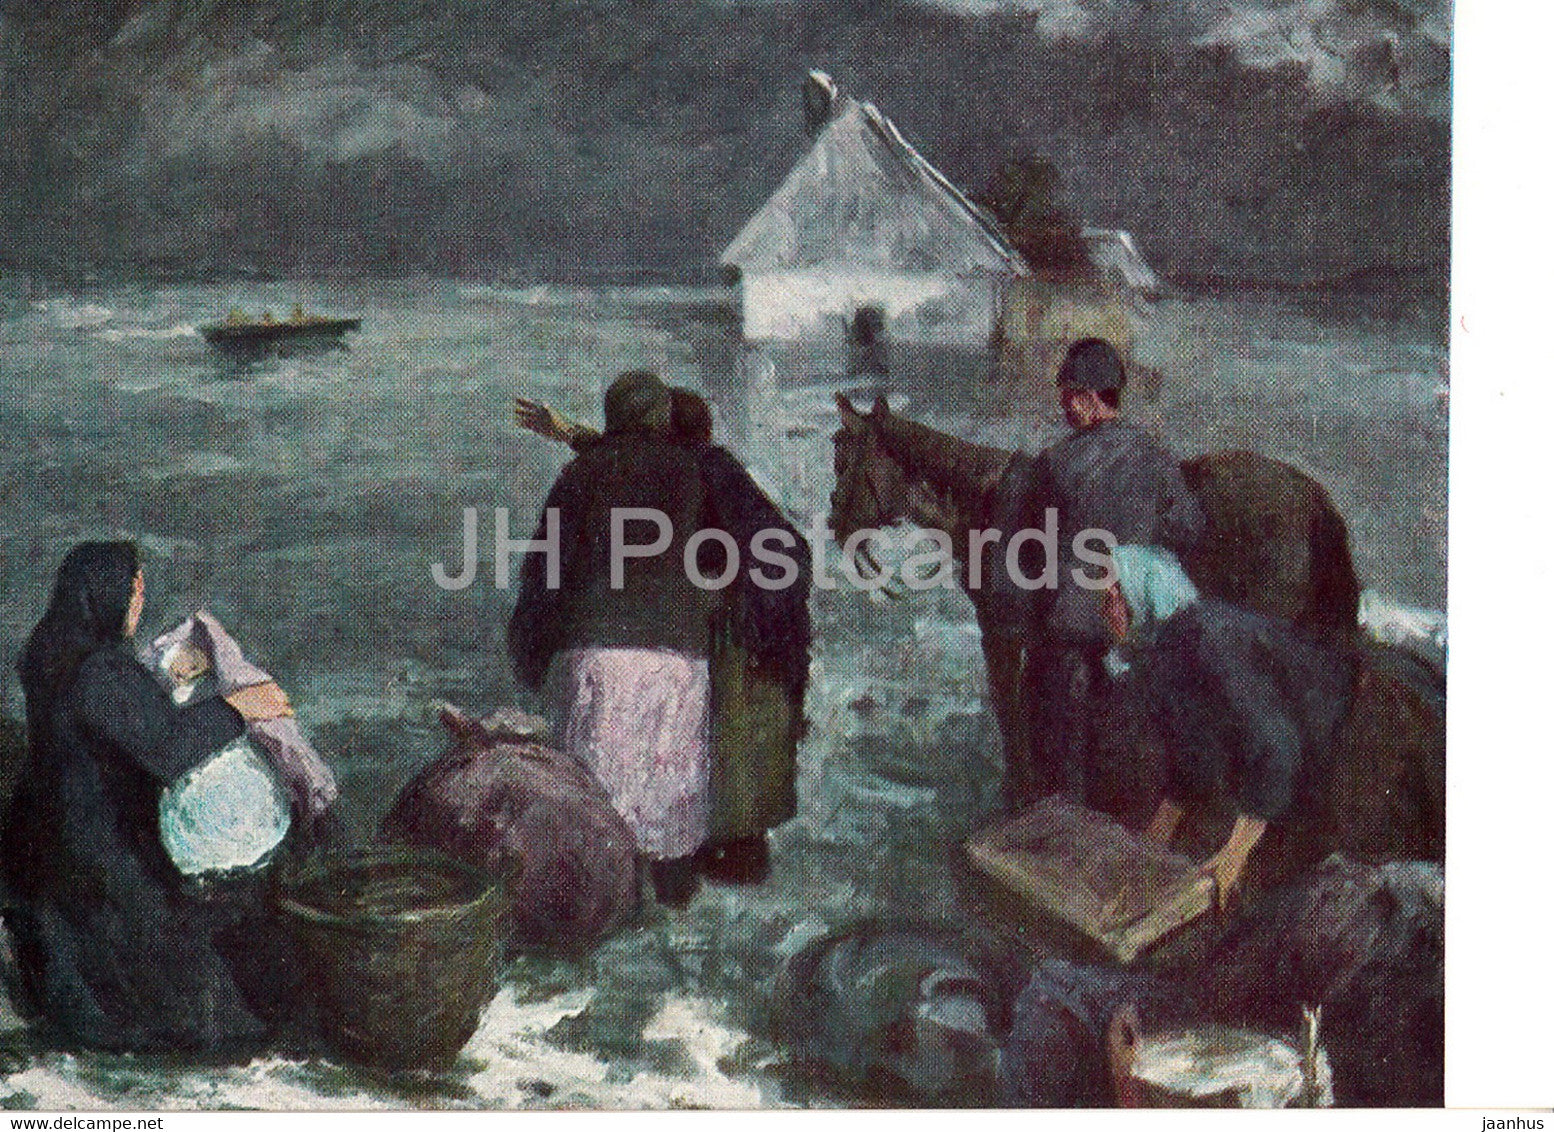 painting by I. Imre - The Flood - horse - 1 - Hungarian art - 1959 - Russia USSR - unused - JH Postcards